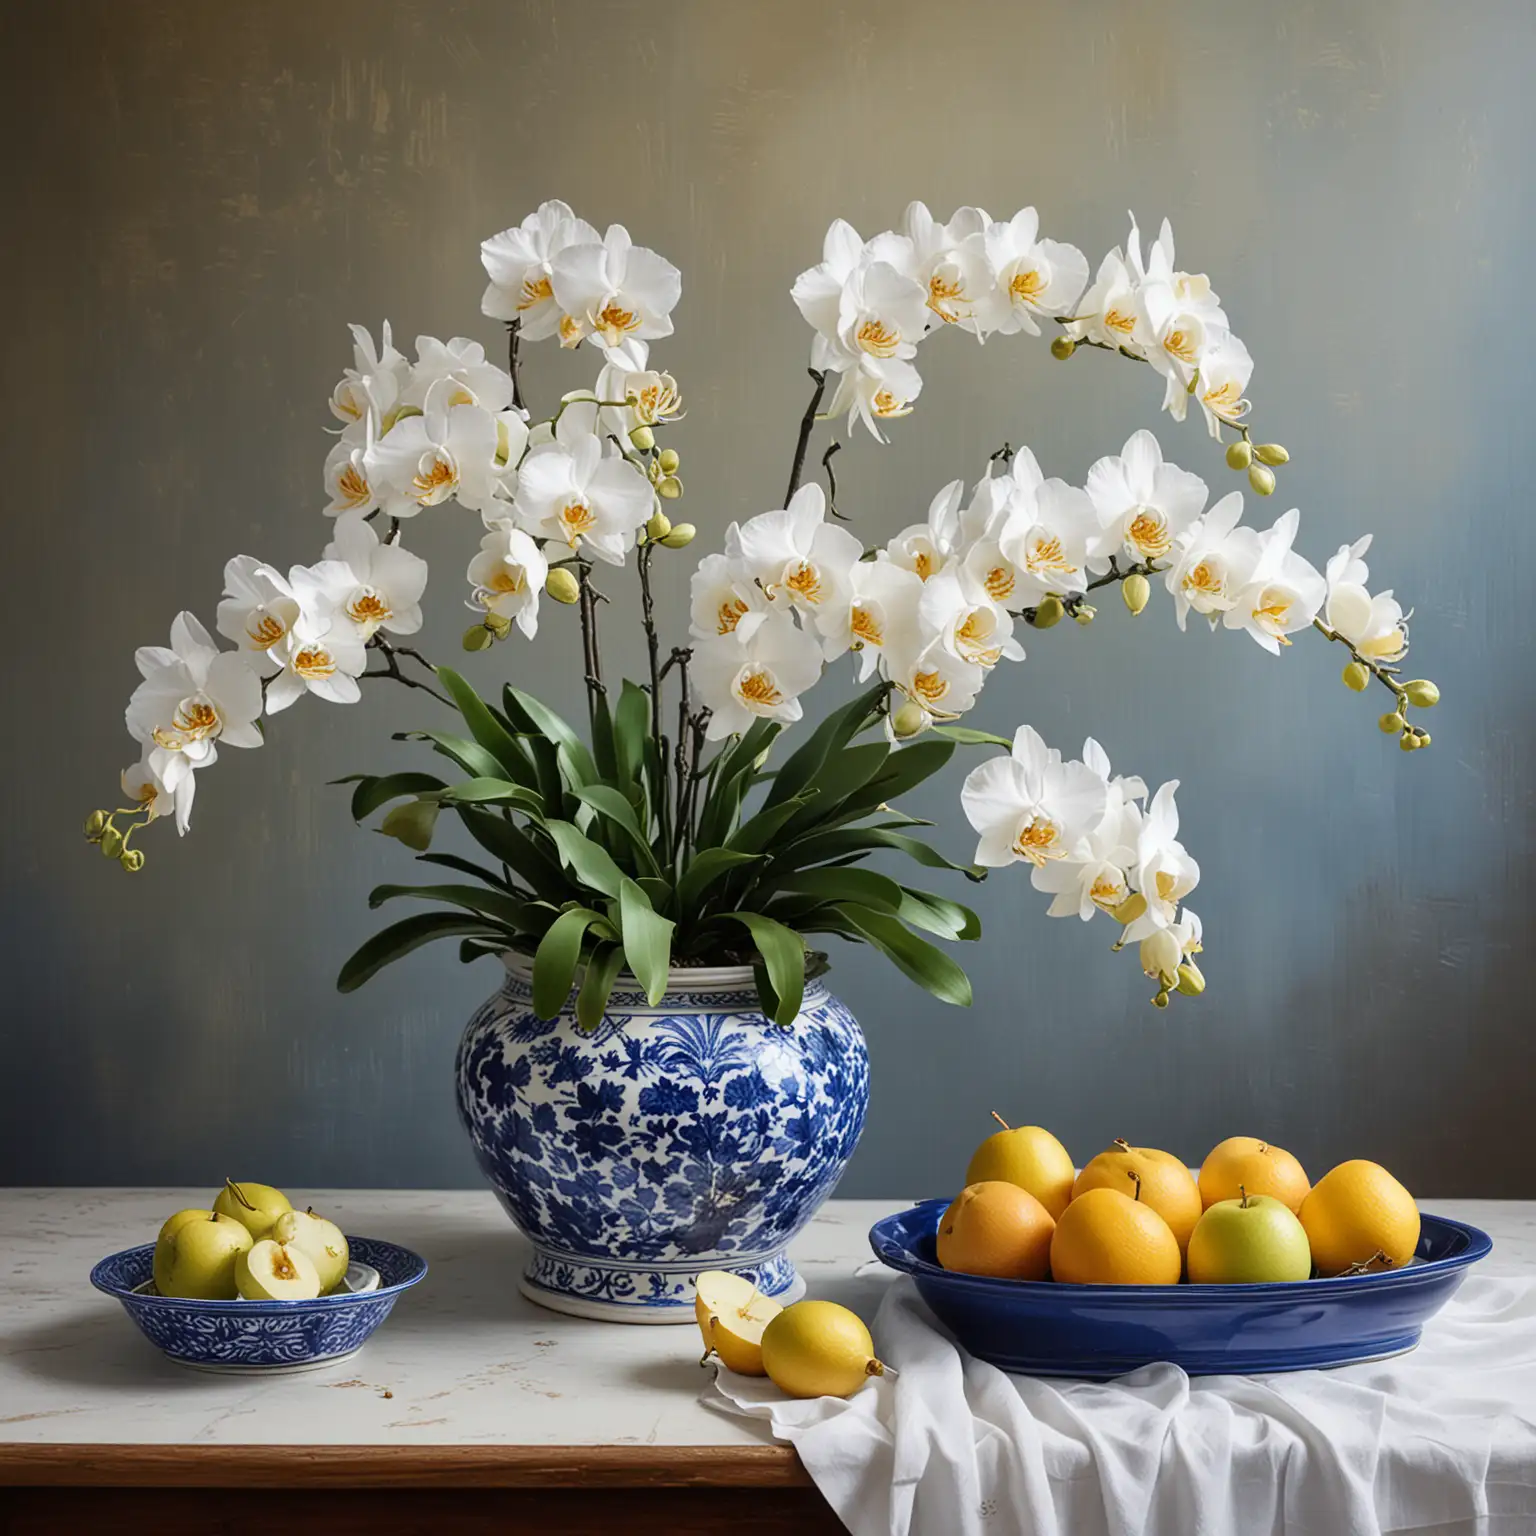 Elegant Still Life White Orchids in Blue Planter with Fruit